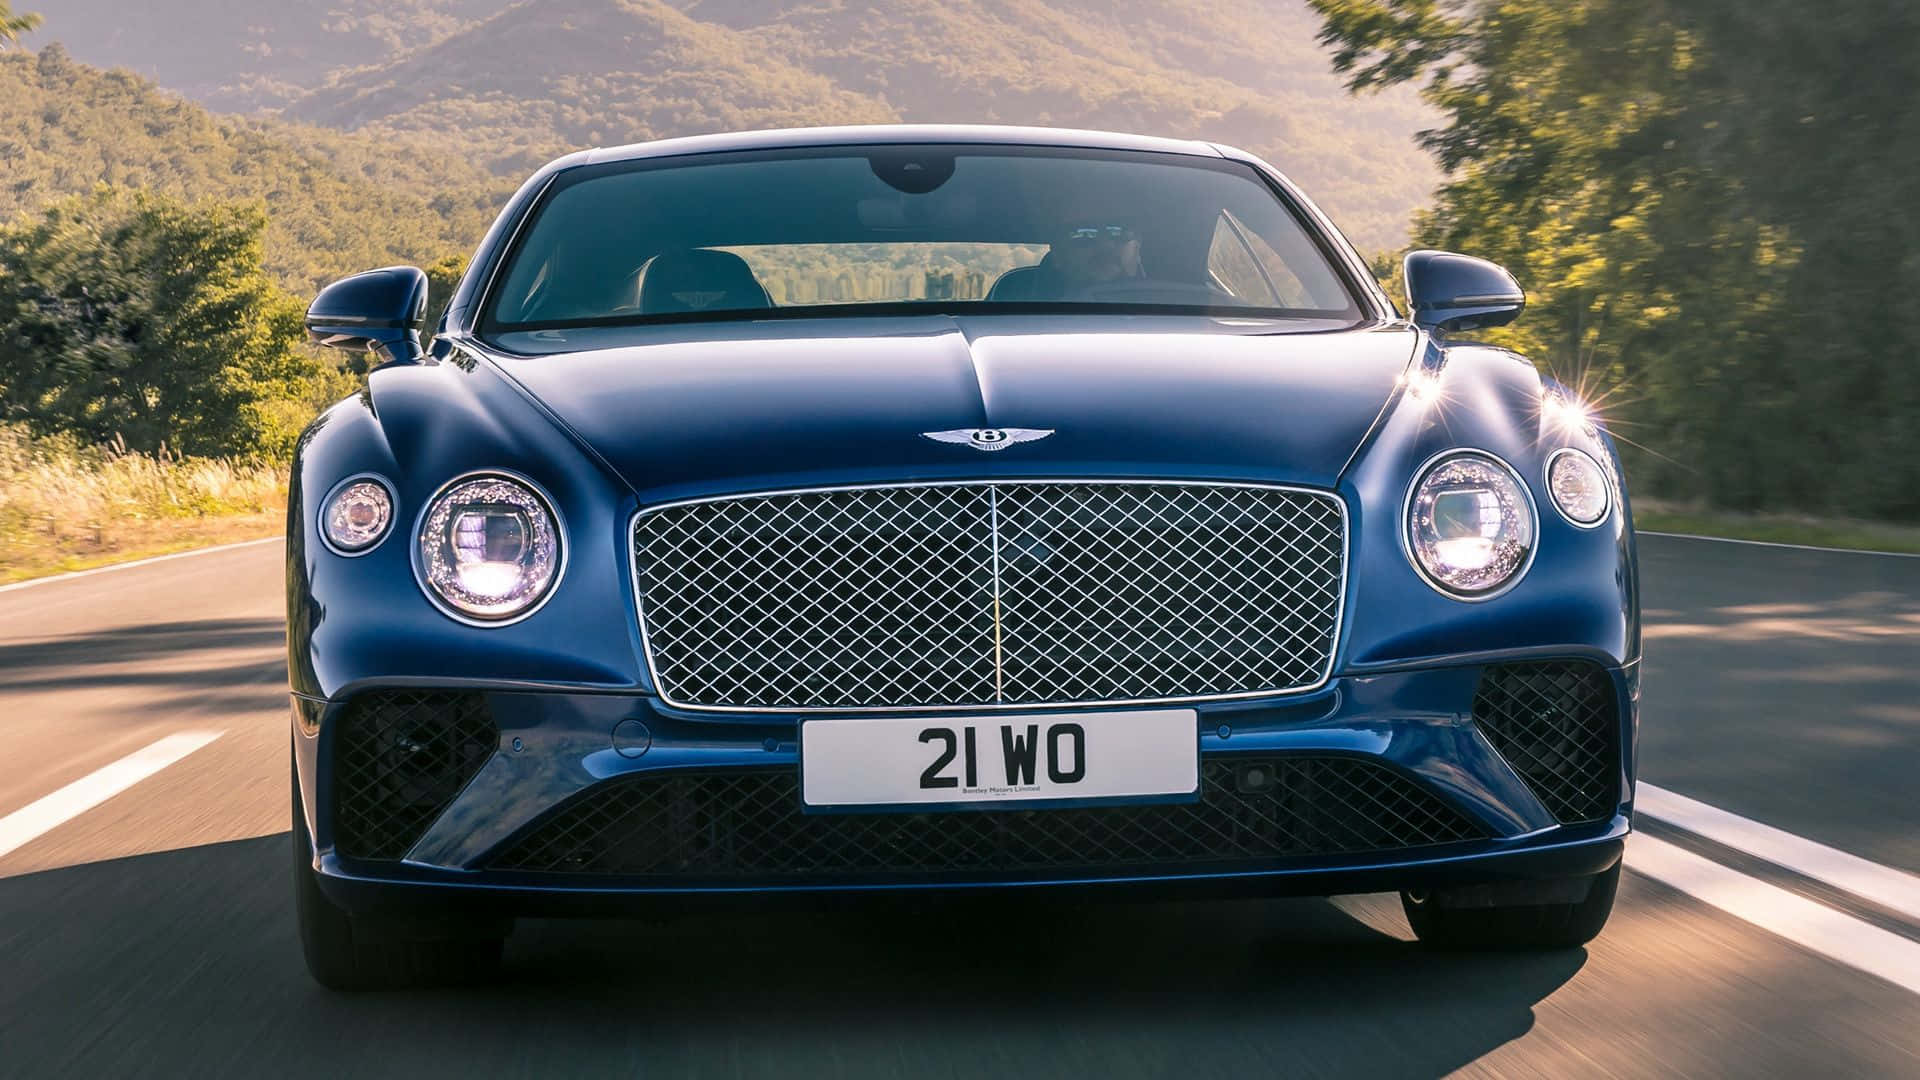 Luxurious Best Bentley Driving On a Rural Road